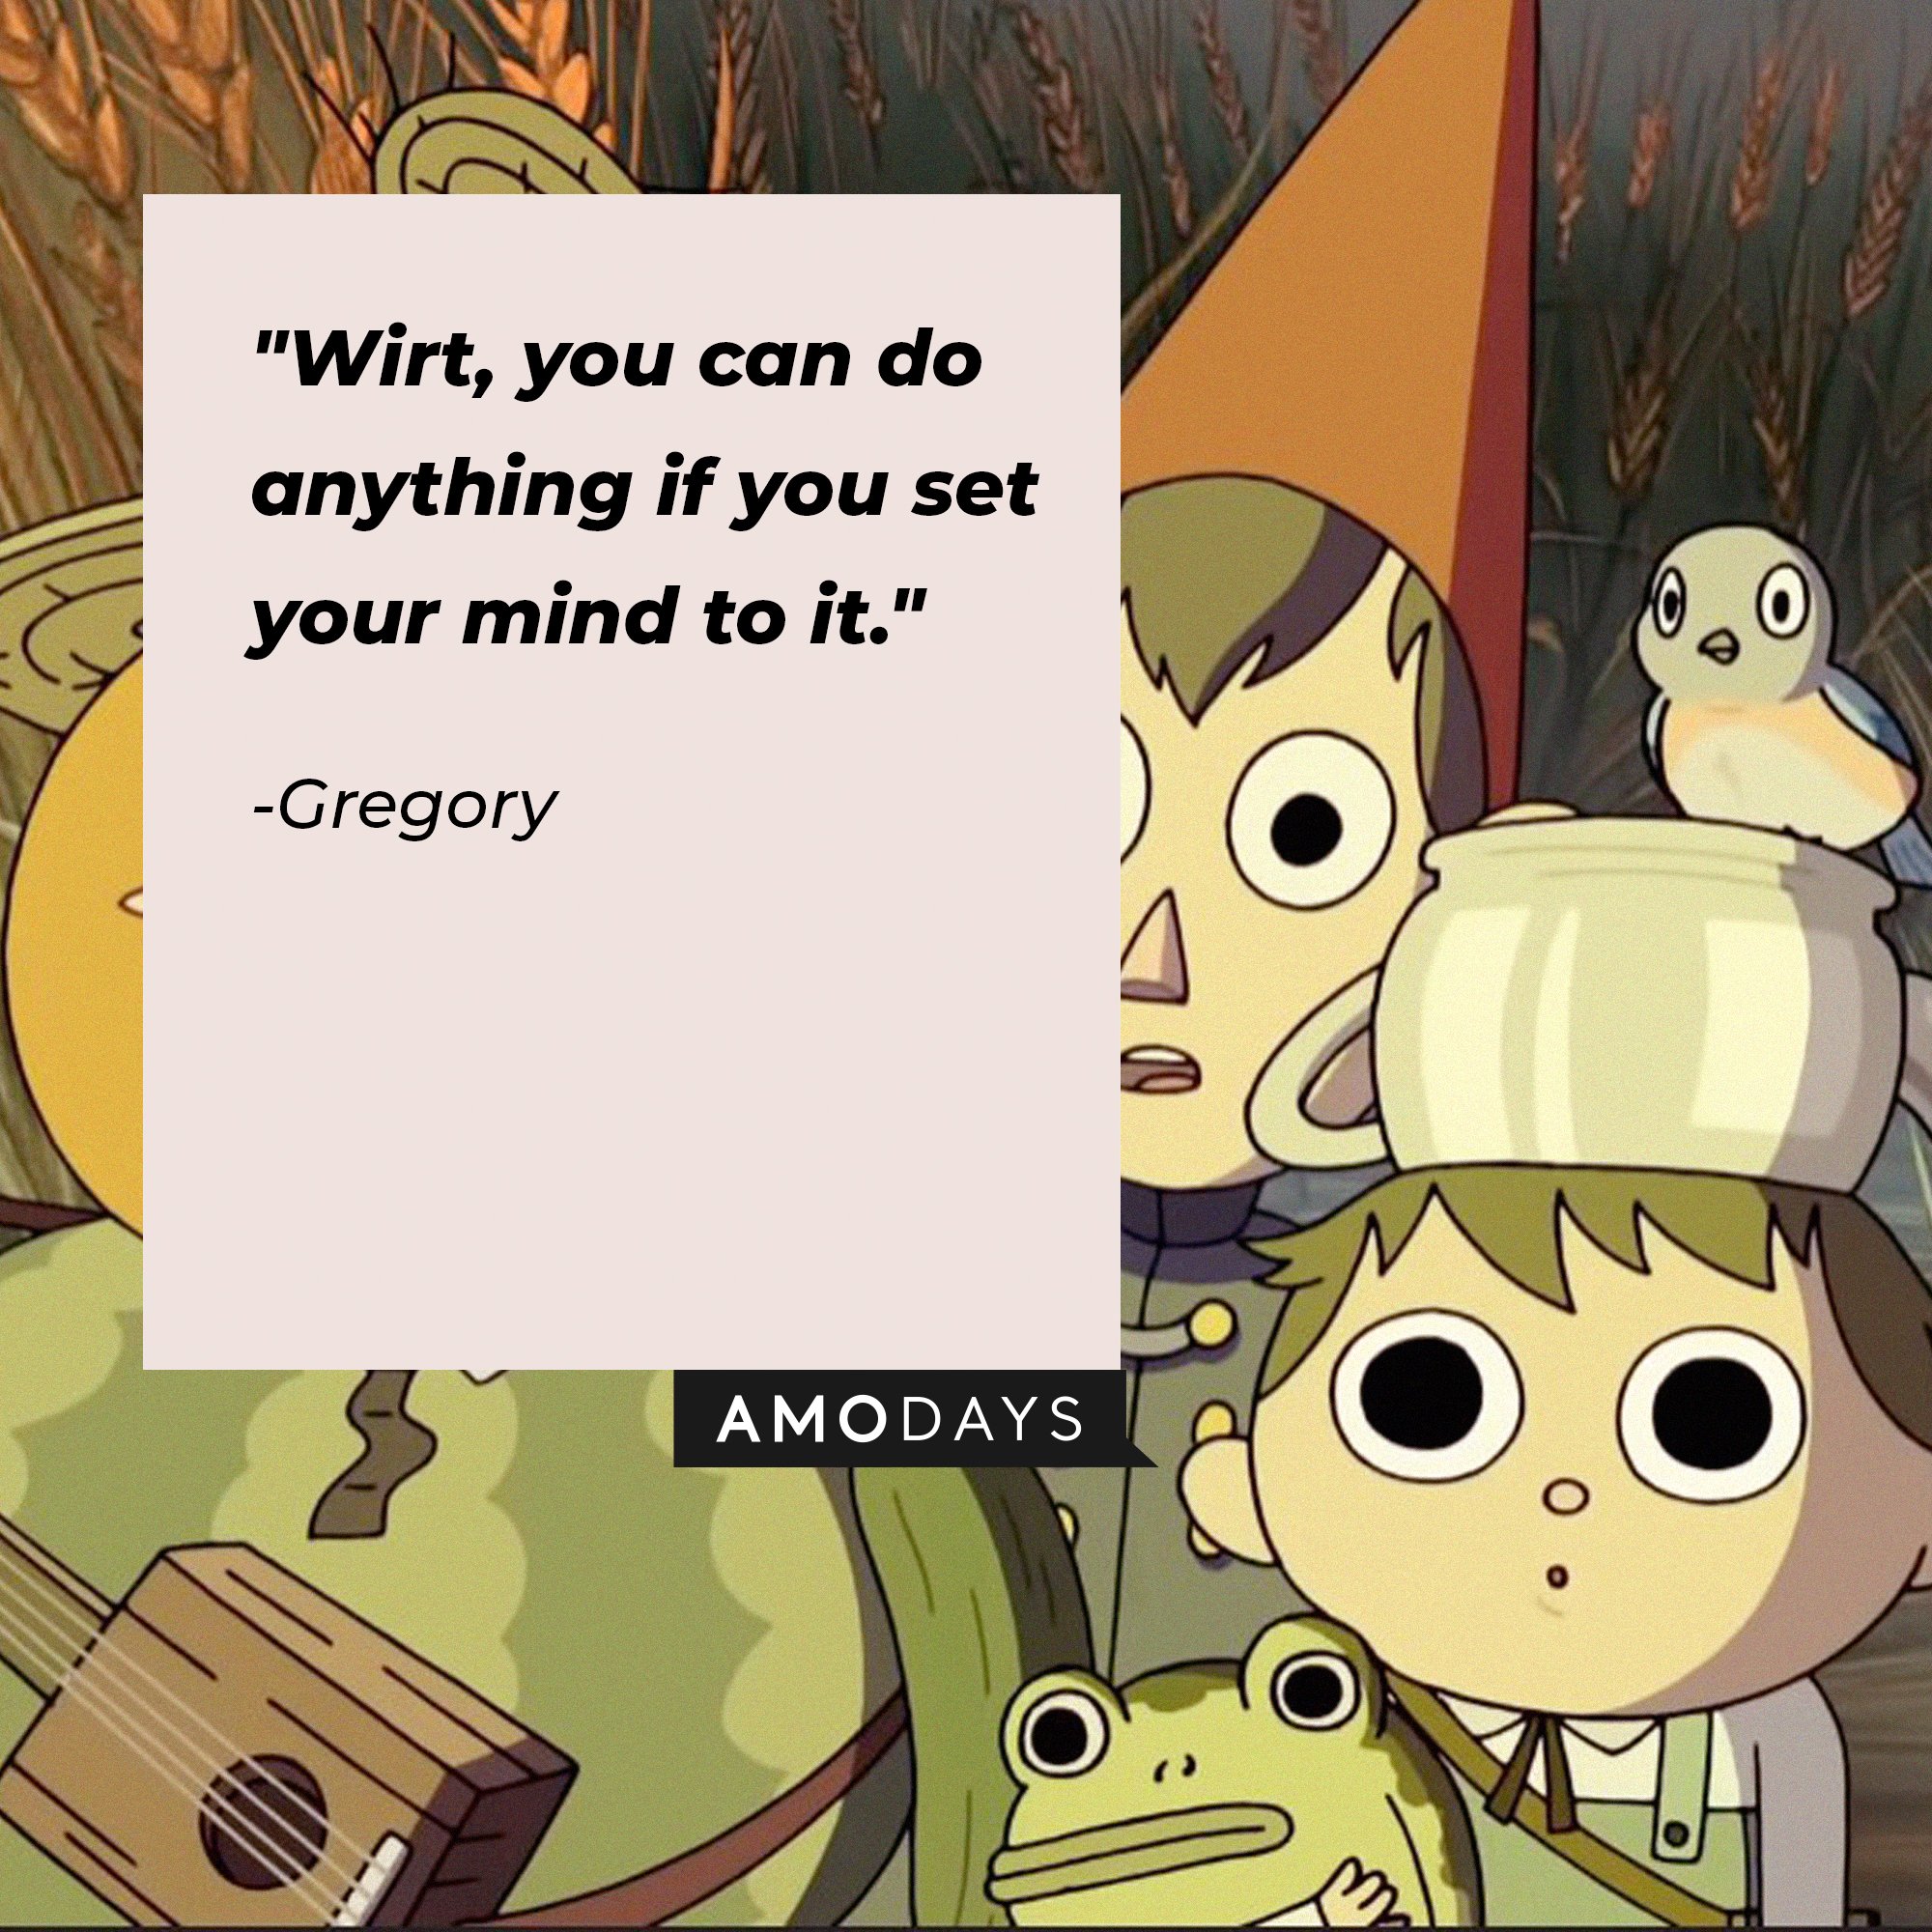 Gregory’s quote: "Wirt, you can do anything if you set your mind to it." | Image: AmoDays